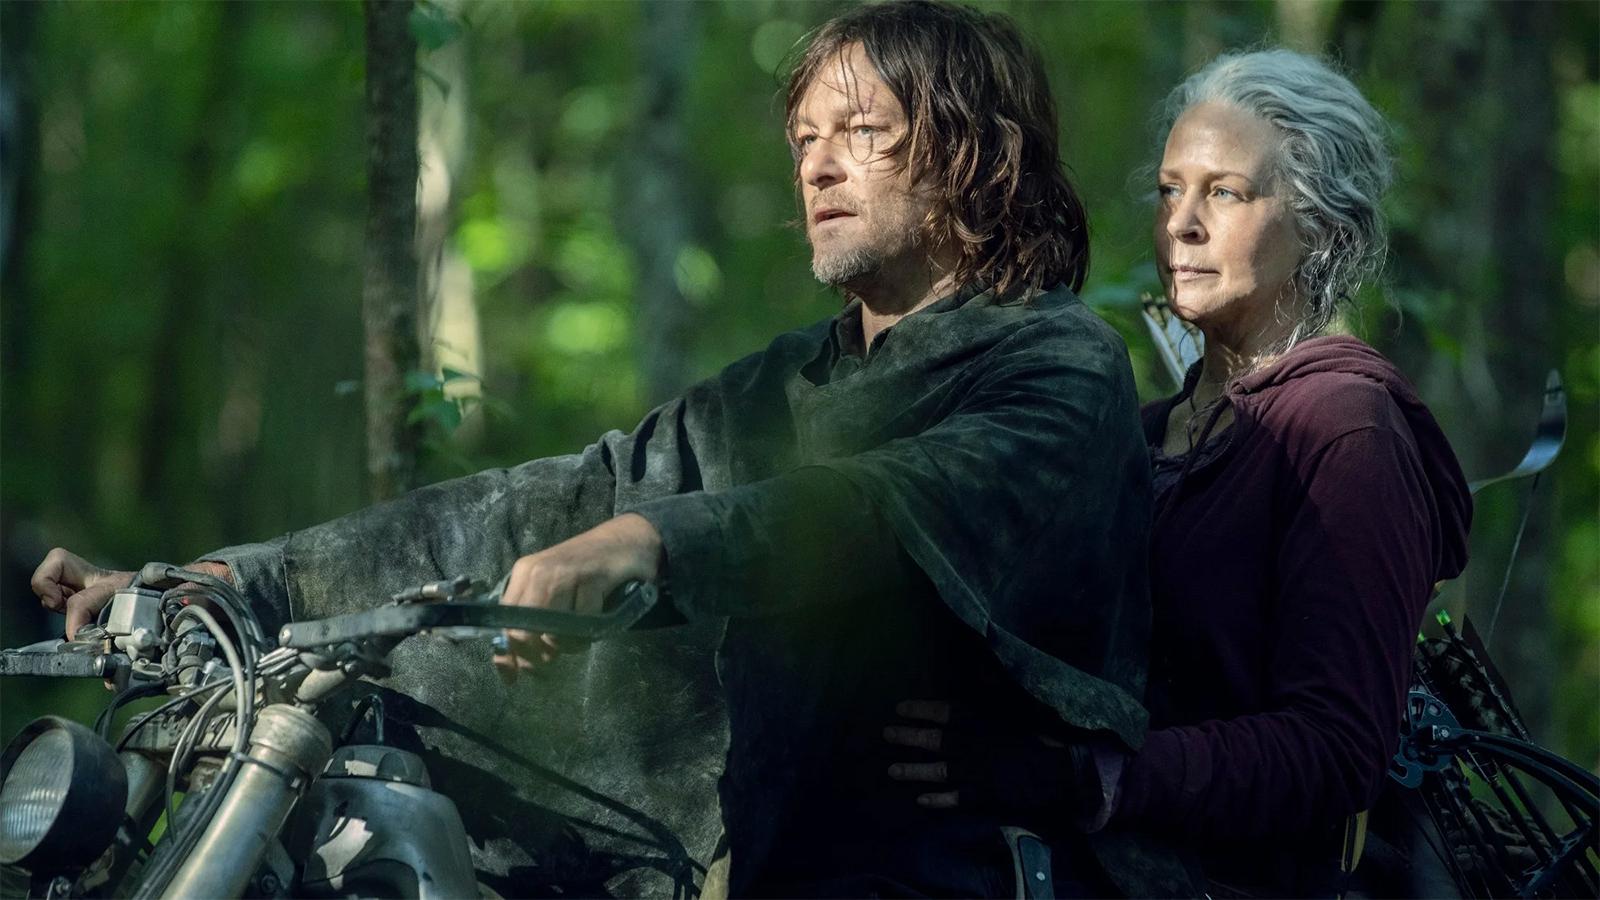 Daryl and Carol in The Walking Dead